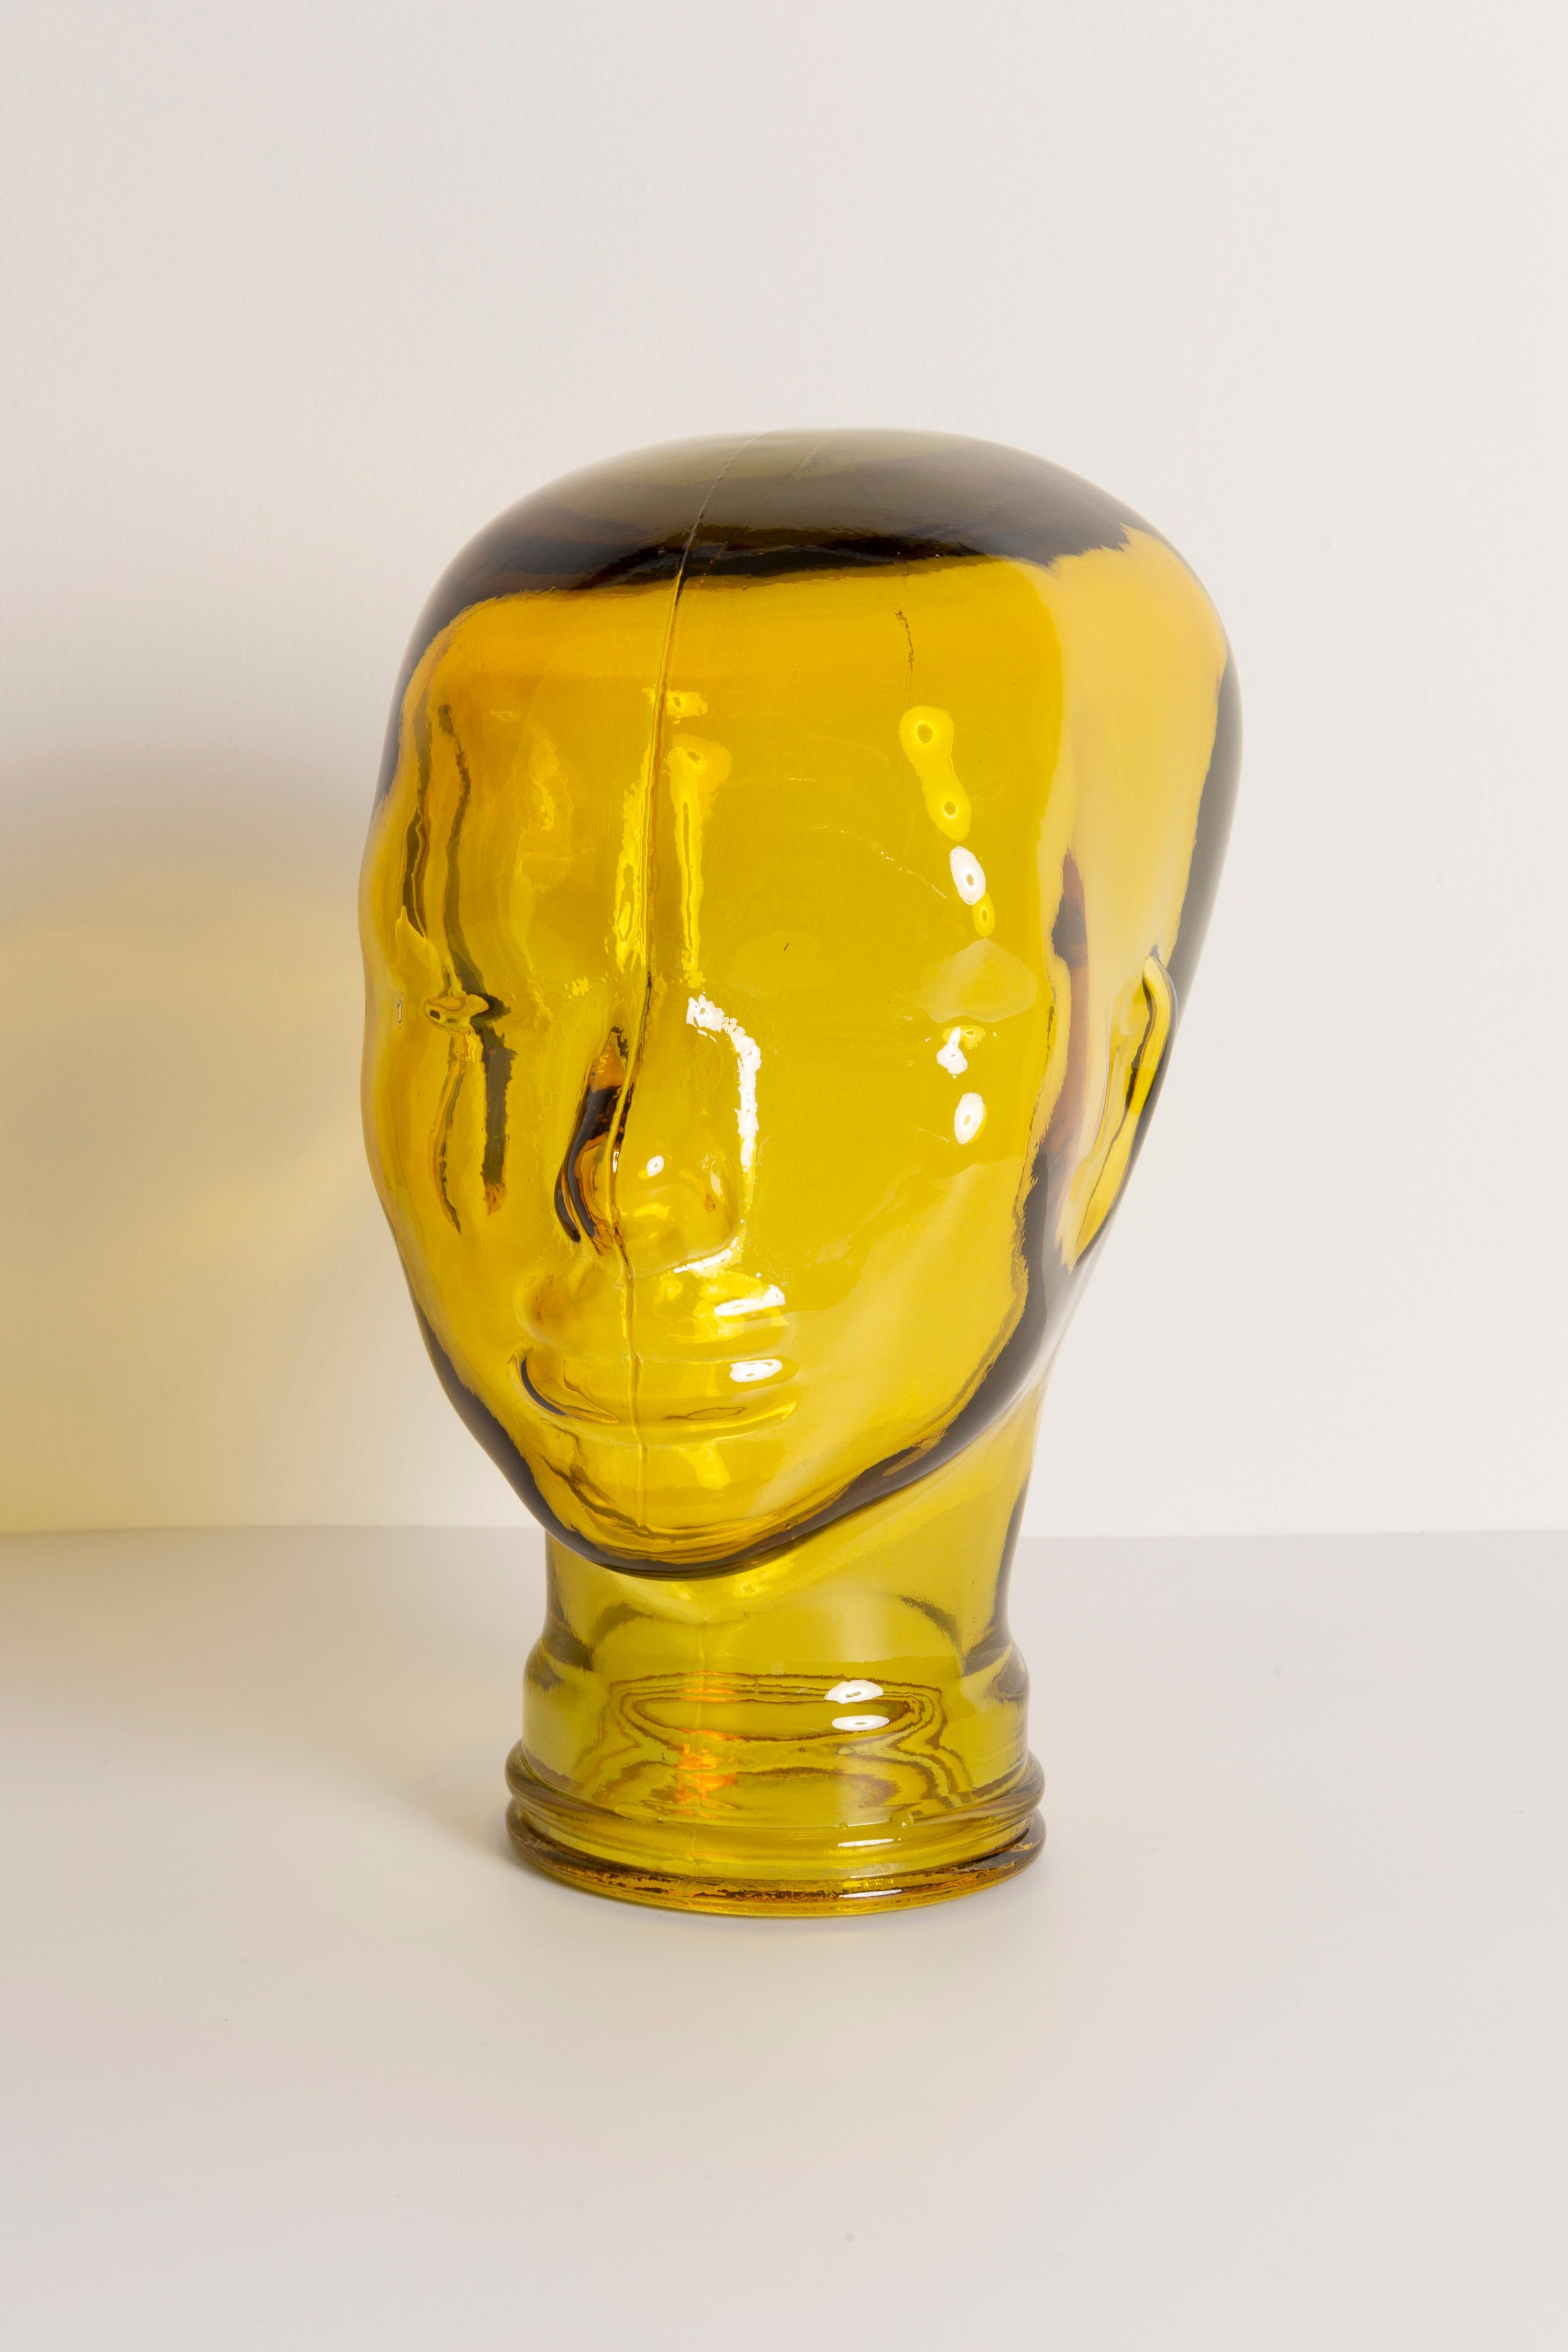 Yellow Vintage Decorative Mannequin Glass Head Sculpture, 1970s, Germany For Sale 5